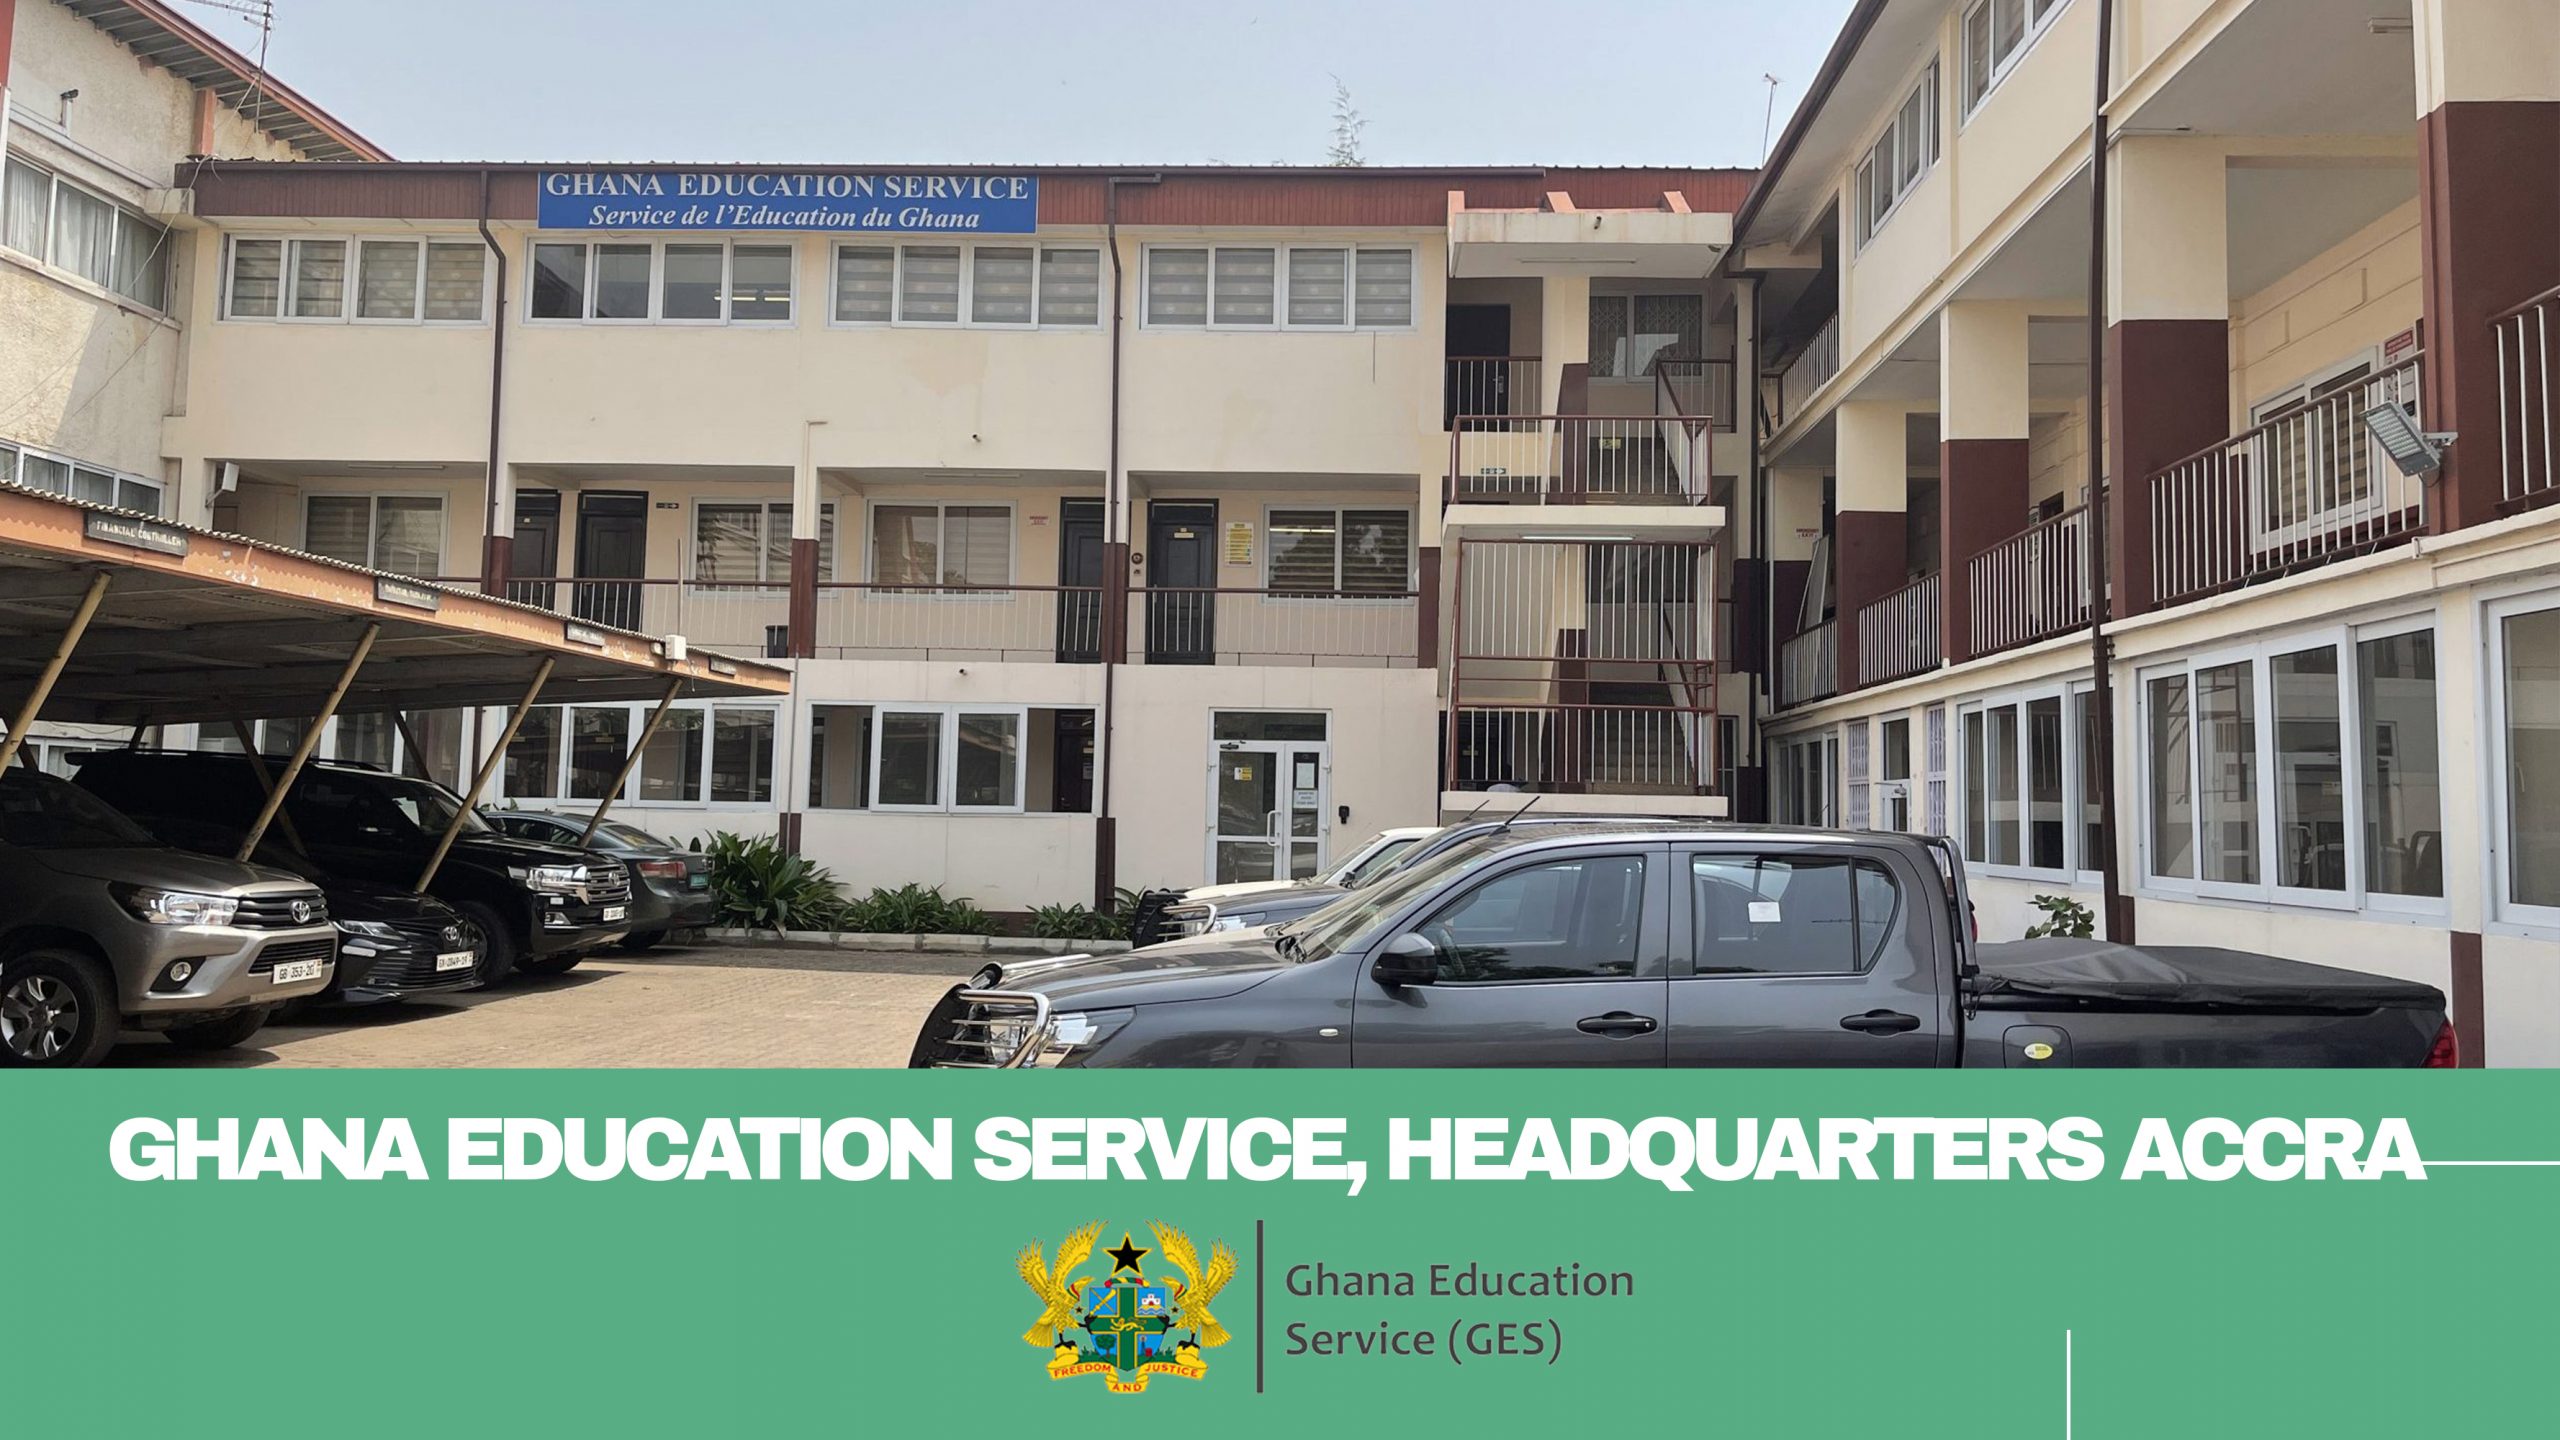 functions of ghana education service